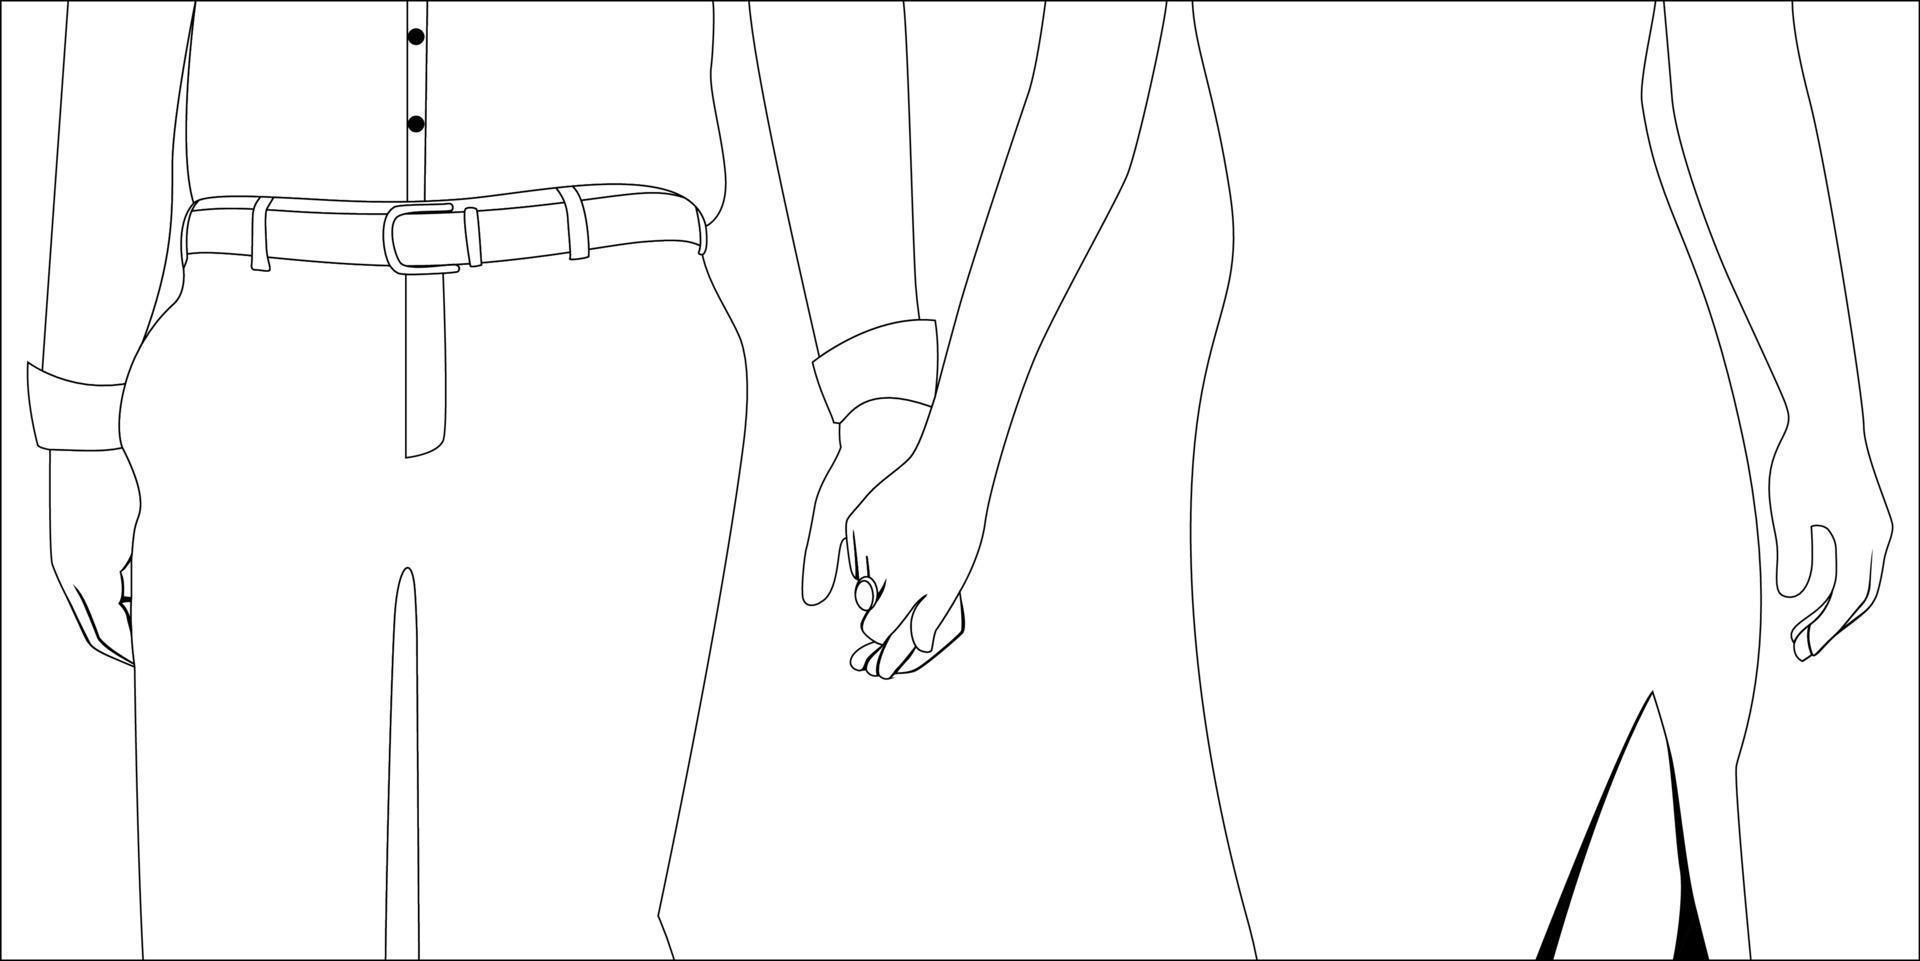 Couple holding hands, cropped character coloring page vector illustration of happy couple.